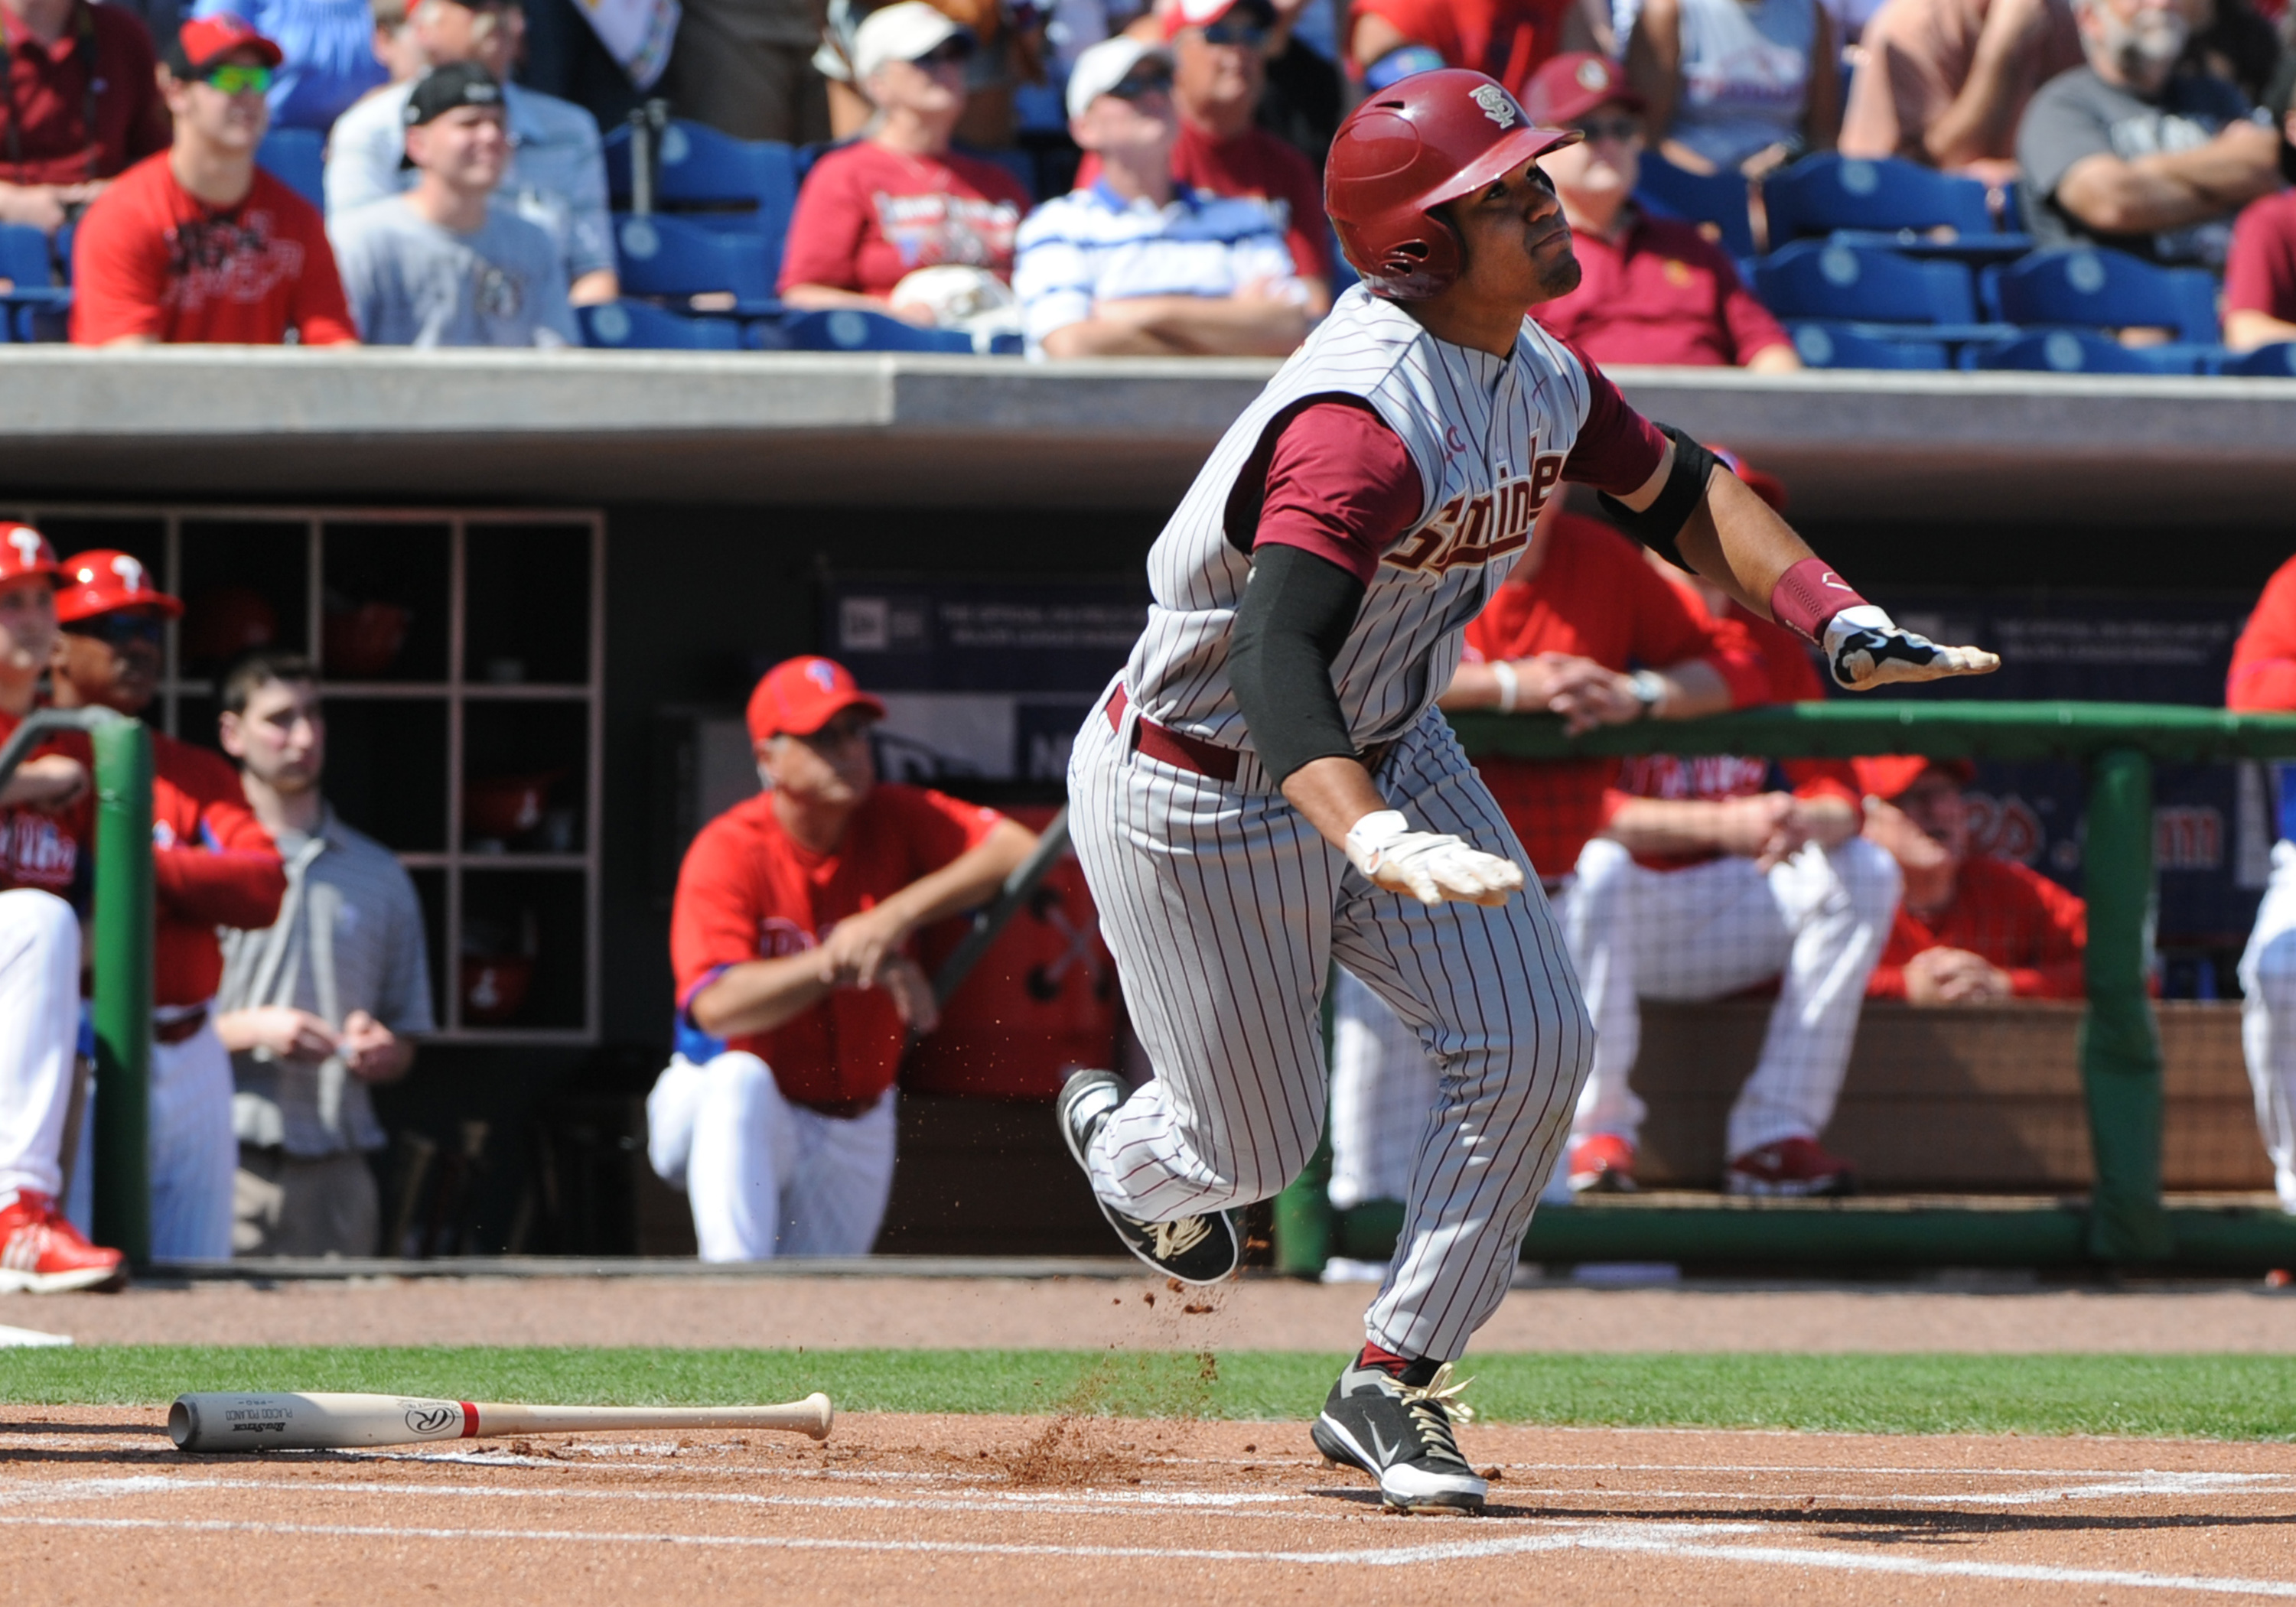 CLEARWATER, FL - FEBRUARY 24:  Infielder Devon Travis #8 of  the Florida State Seminoles bats against the Philadelphia Phillies February 24, 2011 at Bright House Field in Clearwater, Florida.  (Photo by Al Messerschmidt/Getty Images)